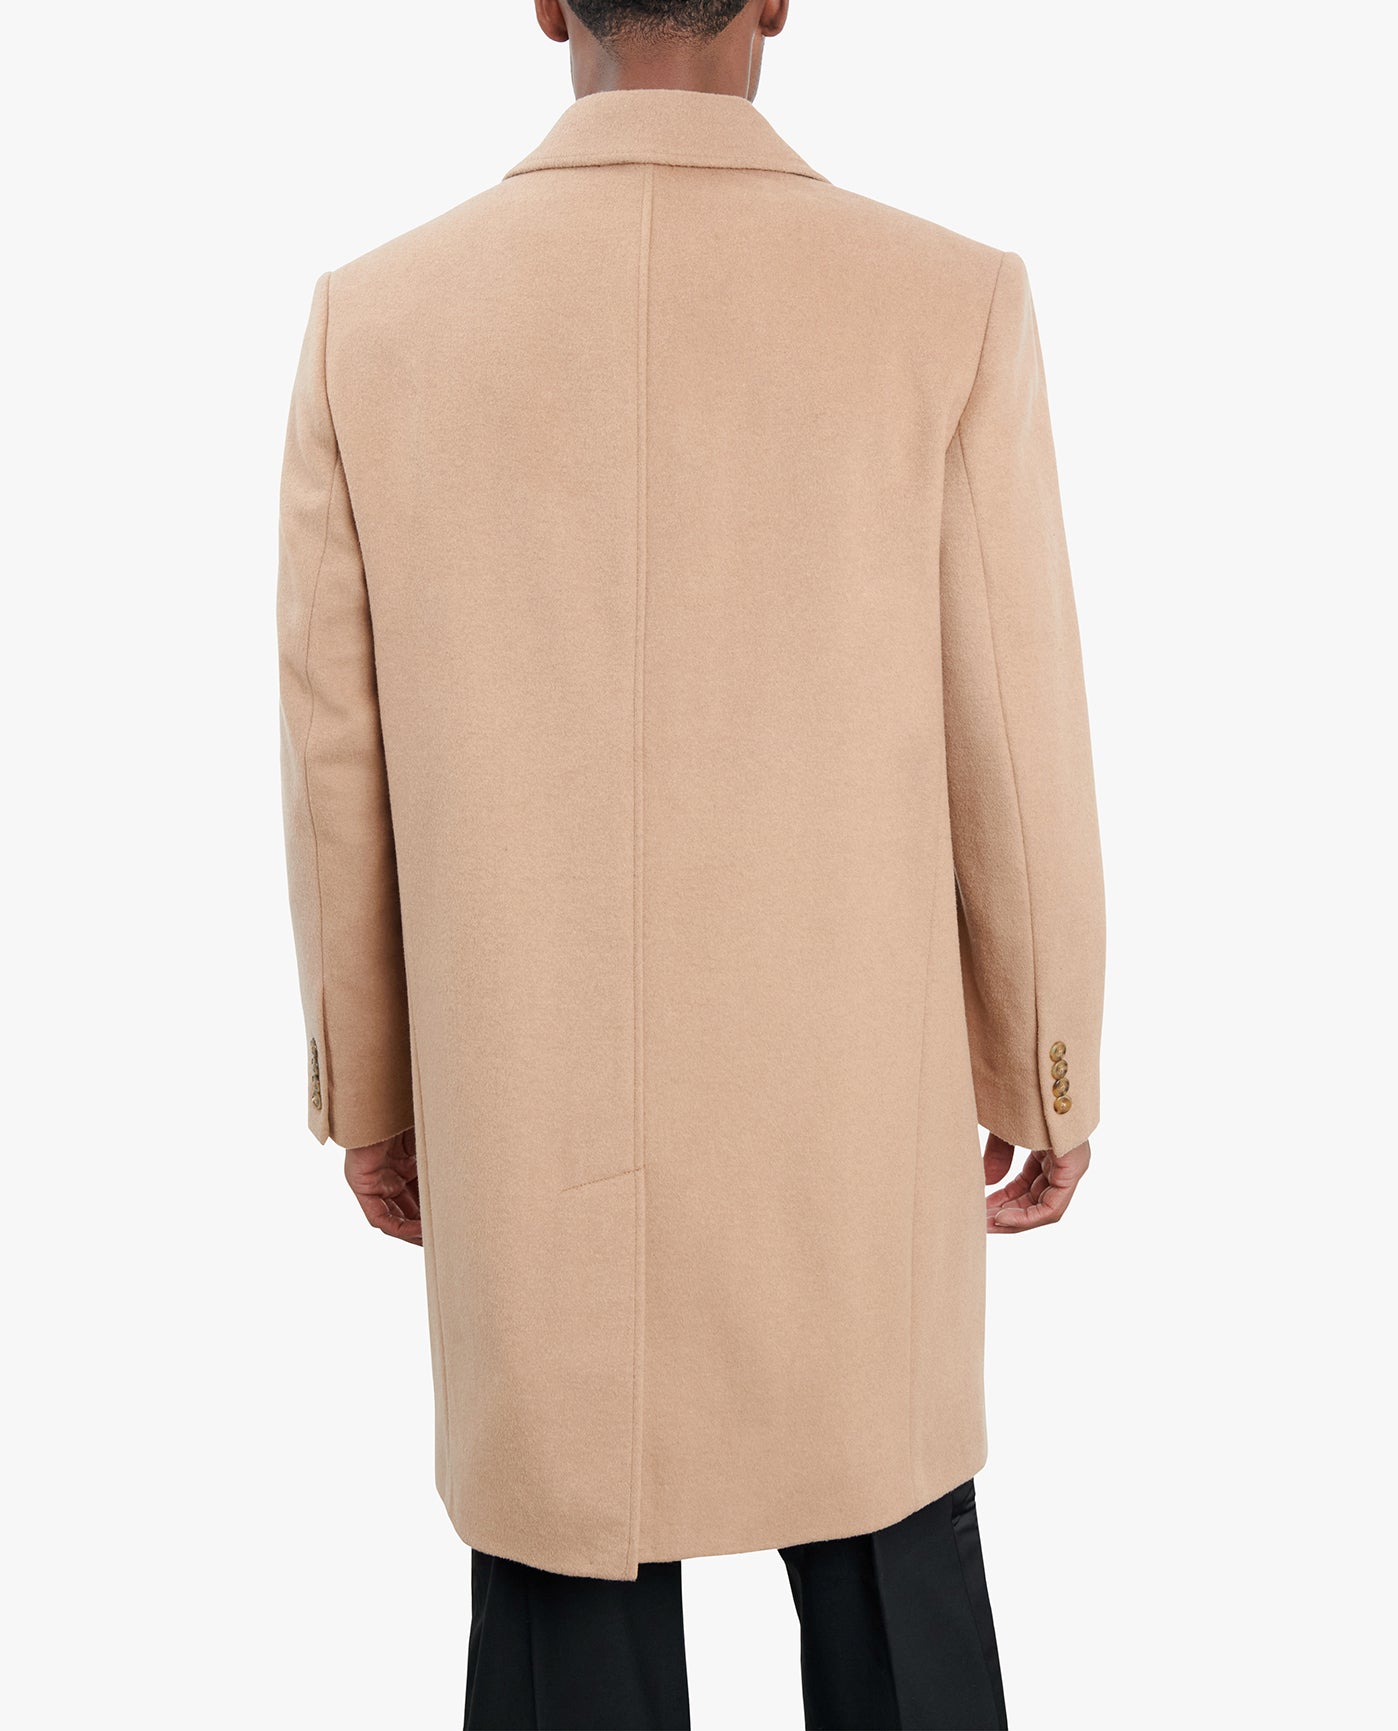 BACK VIEW OF SIGNATURE 42" SINGLE BREASTED WOOL JACKET | CAMEL